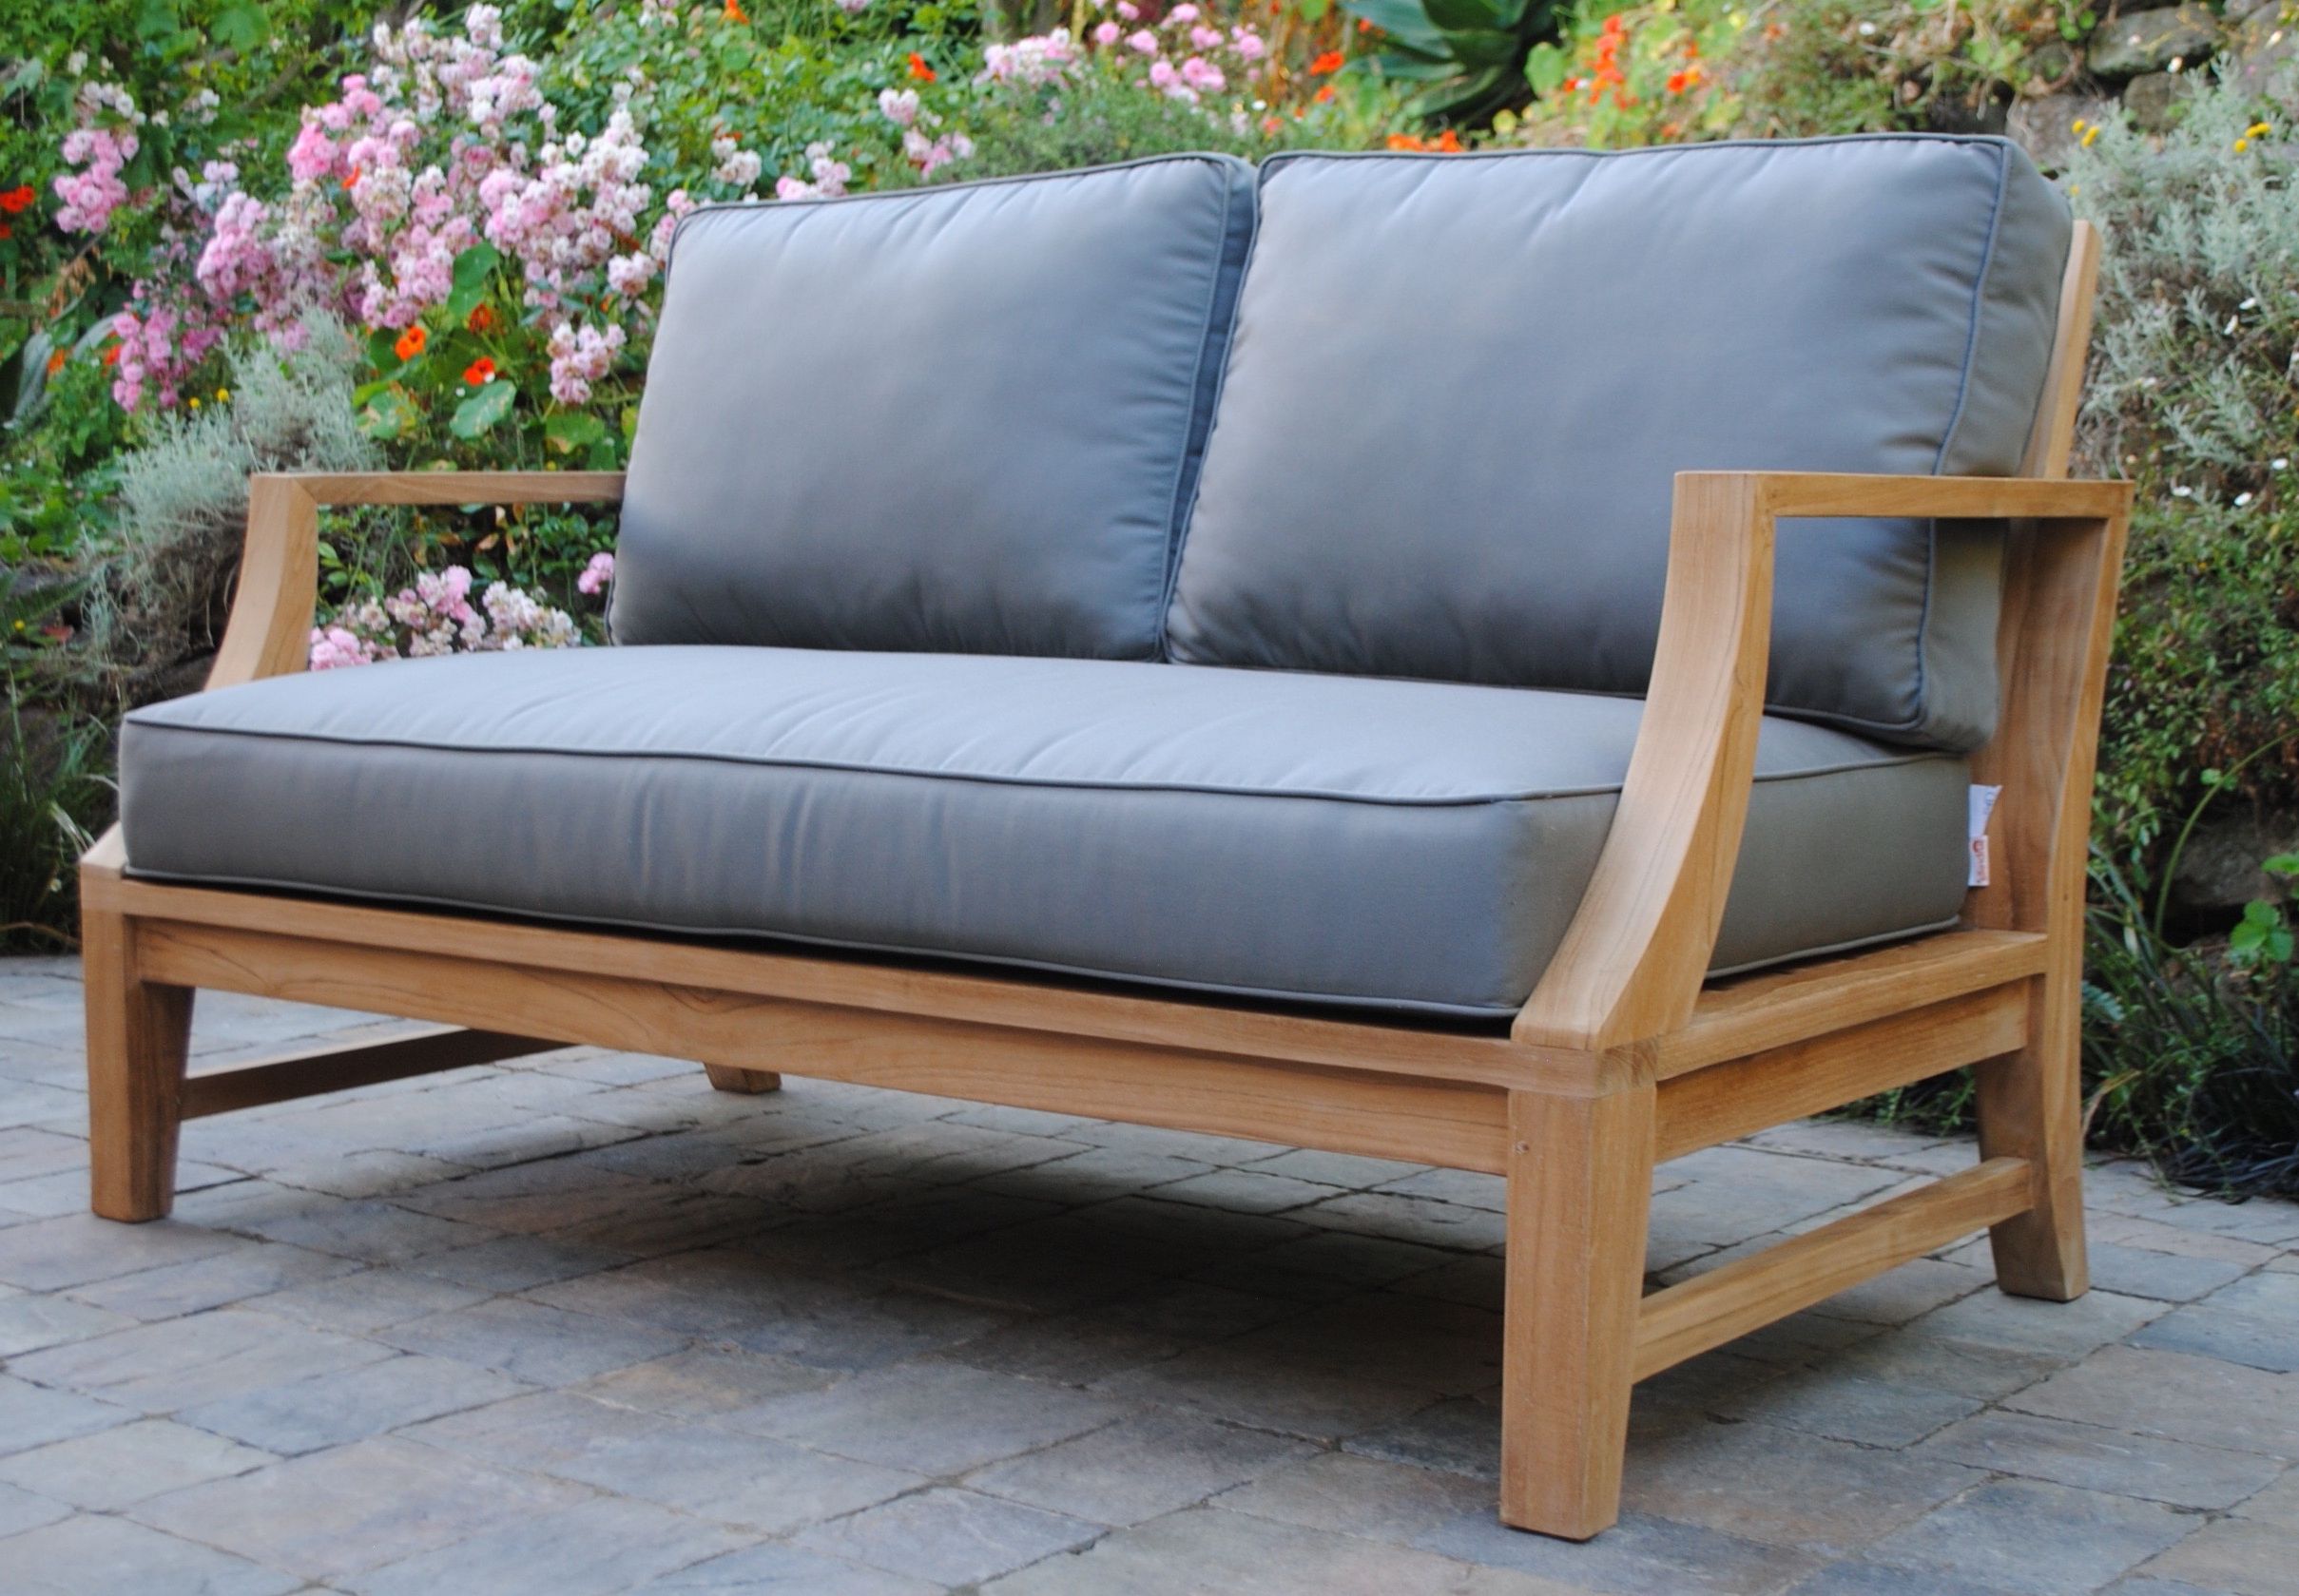 Capitola Loveseat With Sunbrella Cushions – Paradise Teak Throughout Preferred Loveseats With Sunbrella Cushions (View 18 of 25)